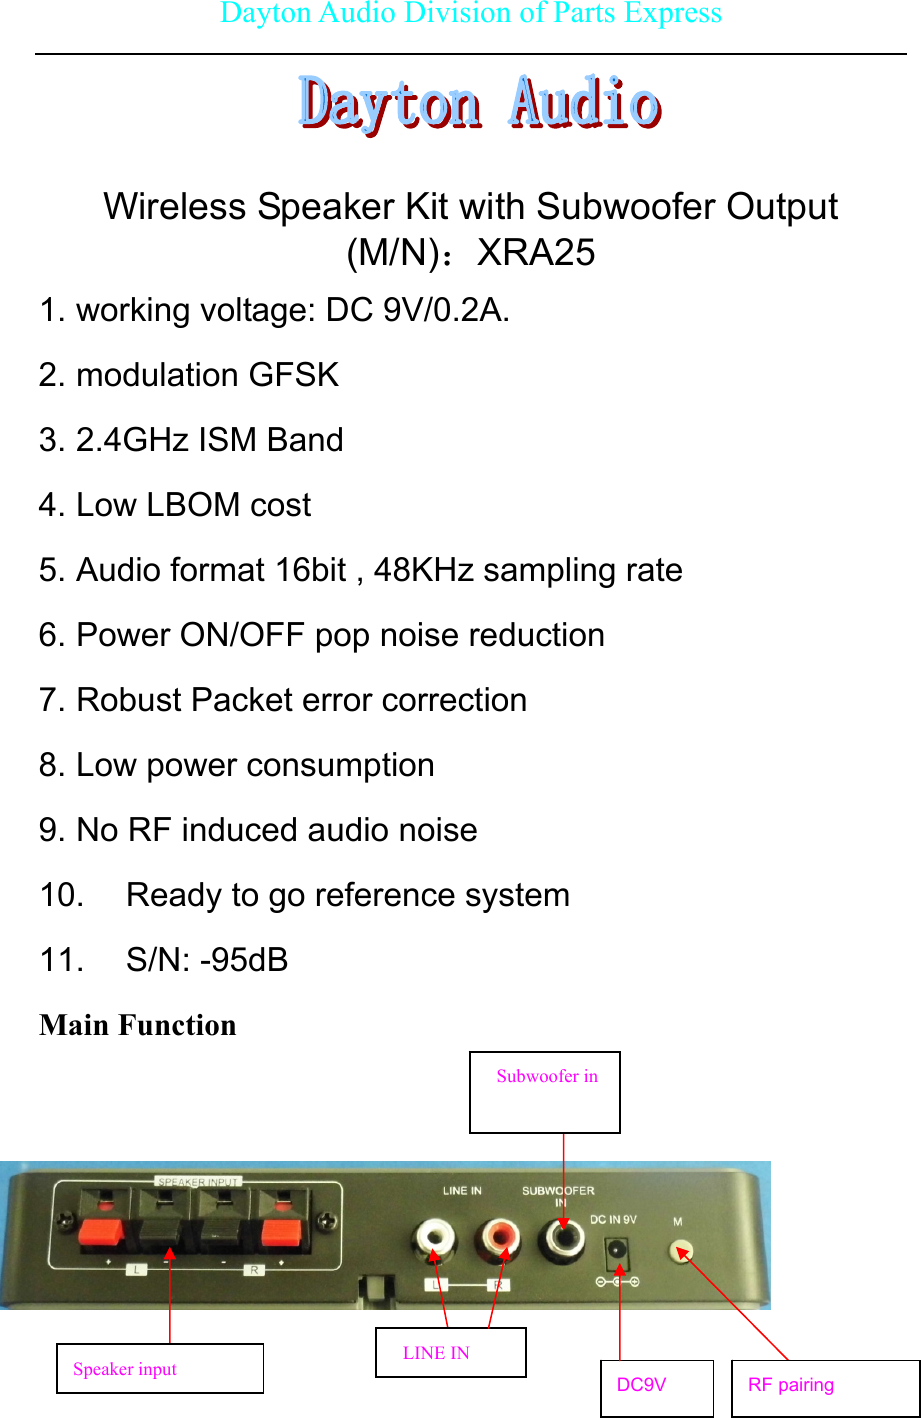 Dayton Audio Division of Parts Express      Wireless Speaker Kit with Subwoofer Output (M/N)：XRA25 1. working voltage: DC 9V/0.2A. 2. modulation GFSK 3. 2.4GHz ISM Band 4. Low LBOM cost 5. Audio format 16bit , 48KHz sampling rate 6. Power ON/OFF pop noise reduction 7. Robust Packet error correction 8. Low power consumption 9. No RF induced audio noise 10.  Ready to go reference system 11. S/N: -95dB Main Function       DC9V LINE IN Speaker input  RF pairing Subwoofer in 